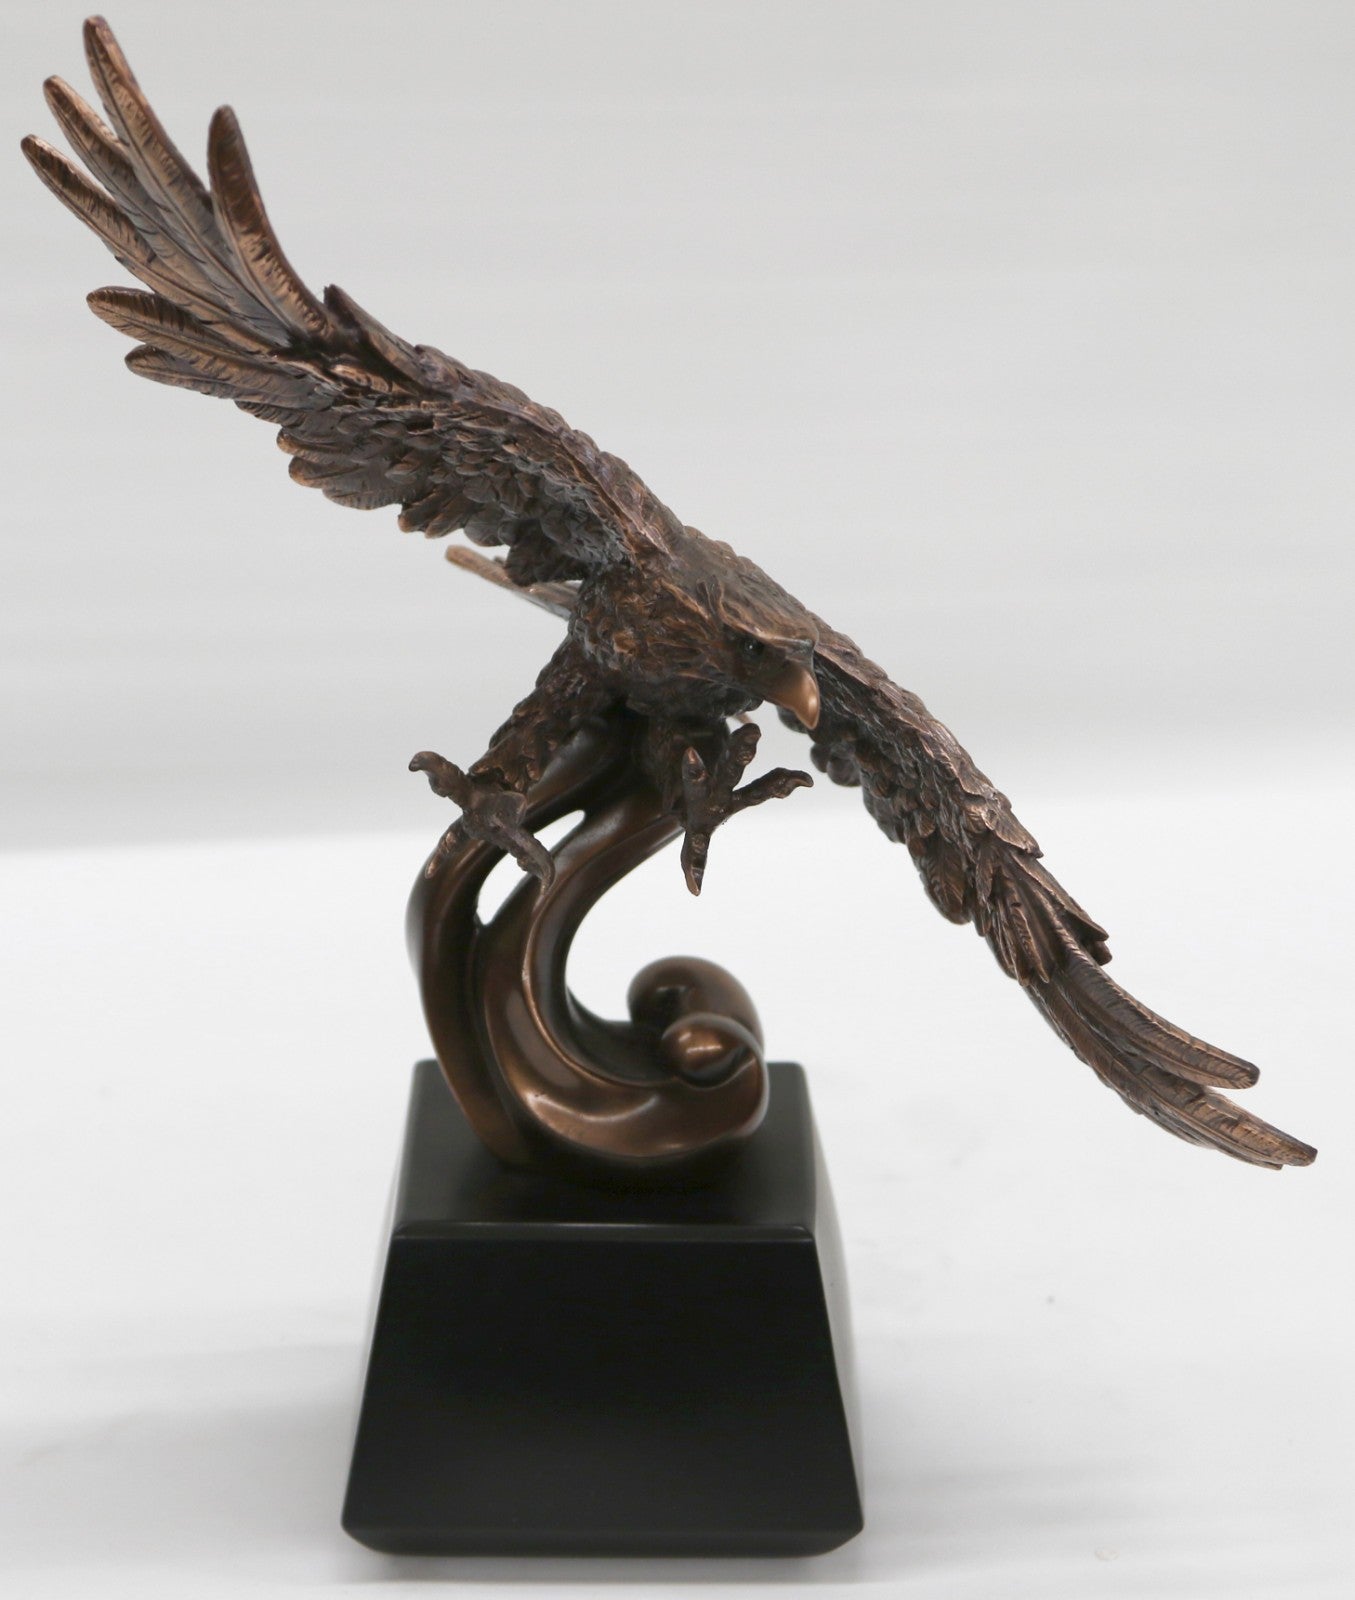 Exquisite Hand Carved and Painted Bronzed American Bald Eagle Folk Art Sculpture